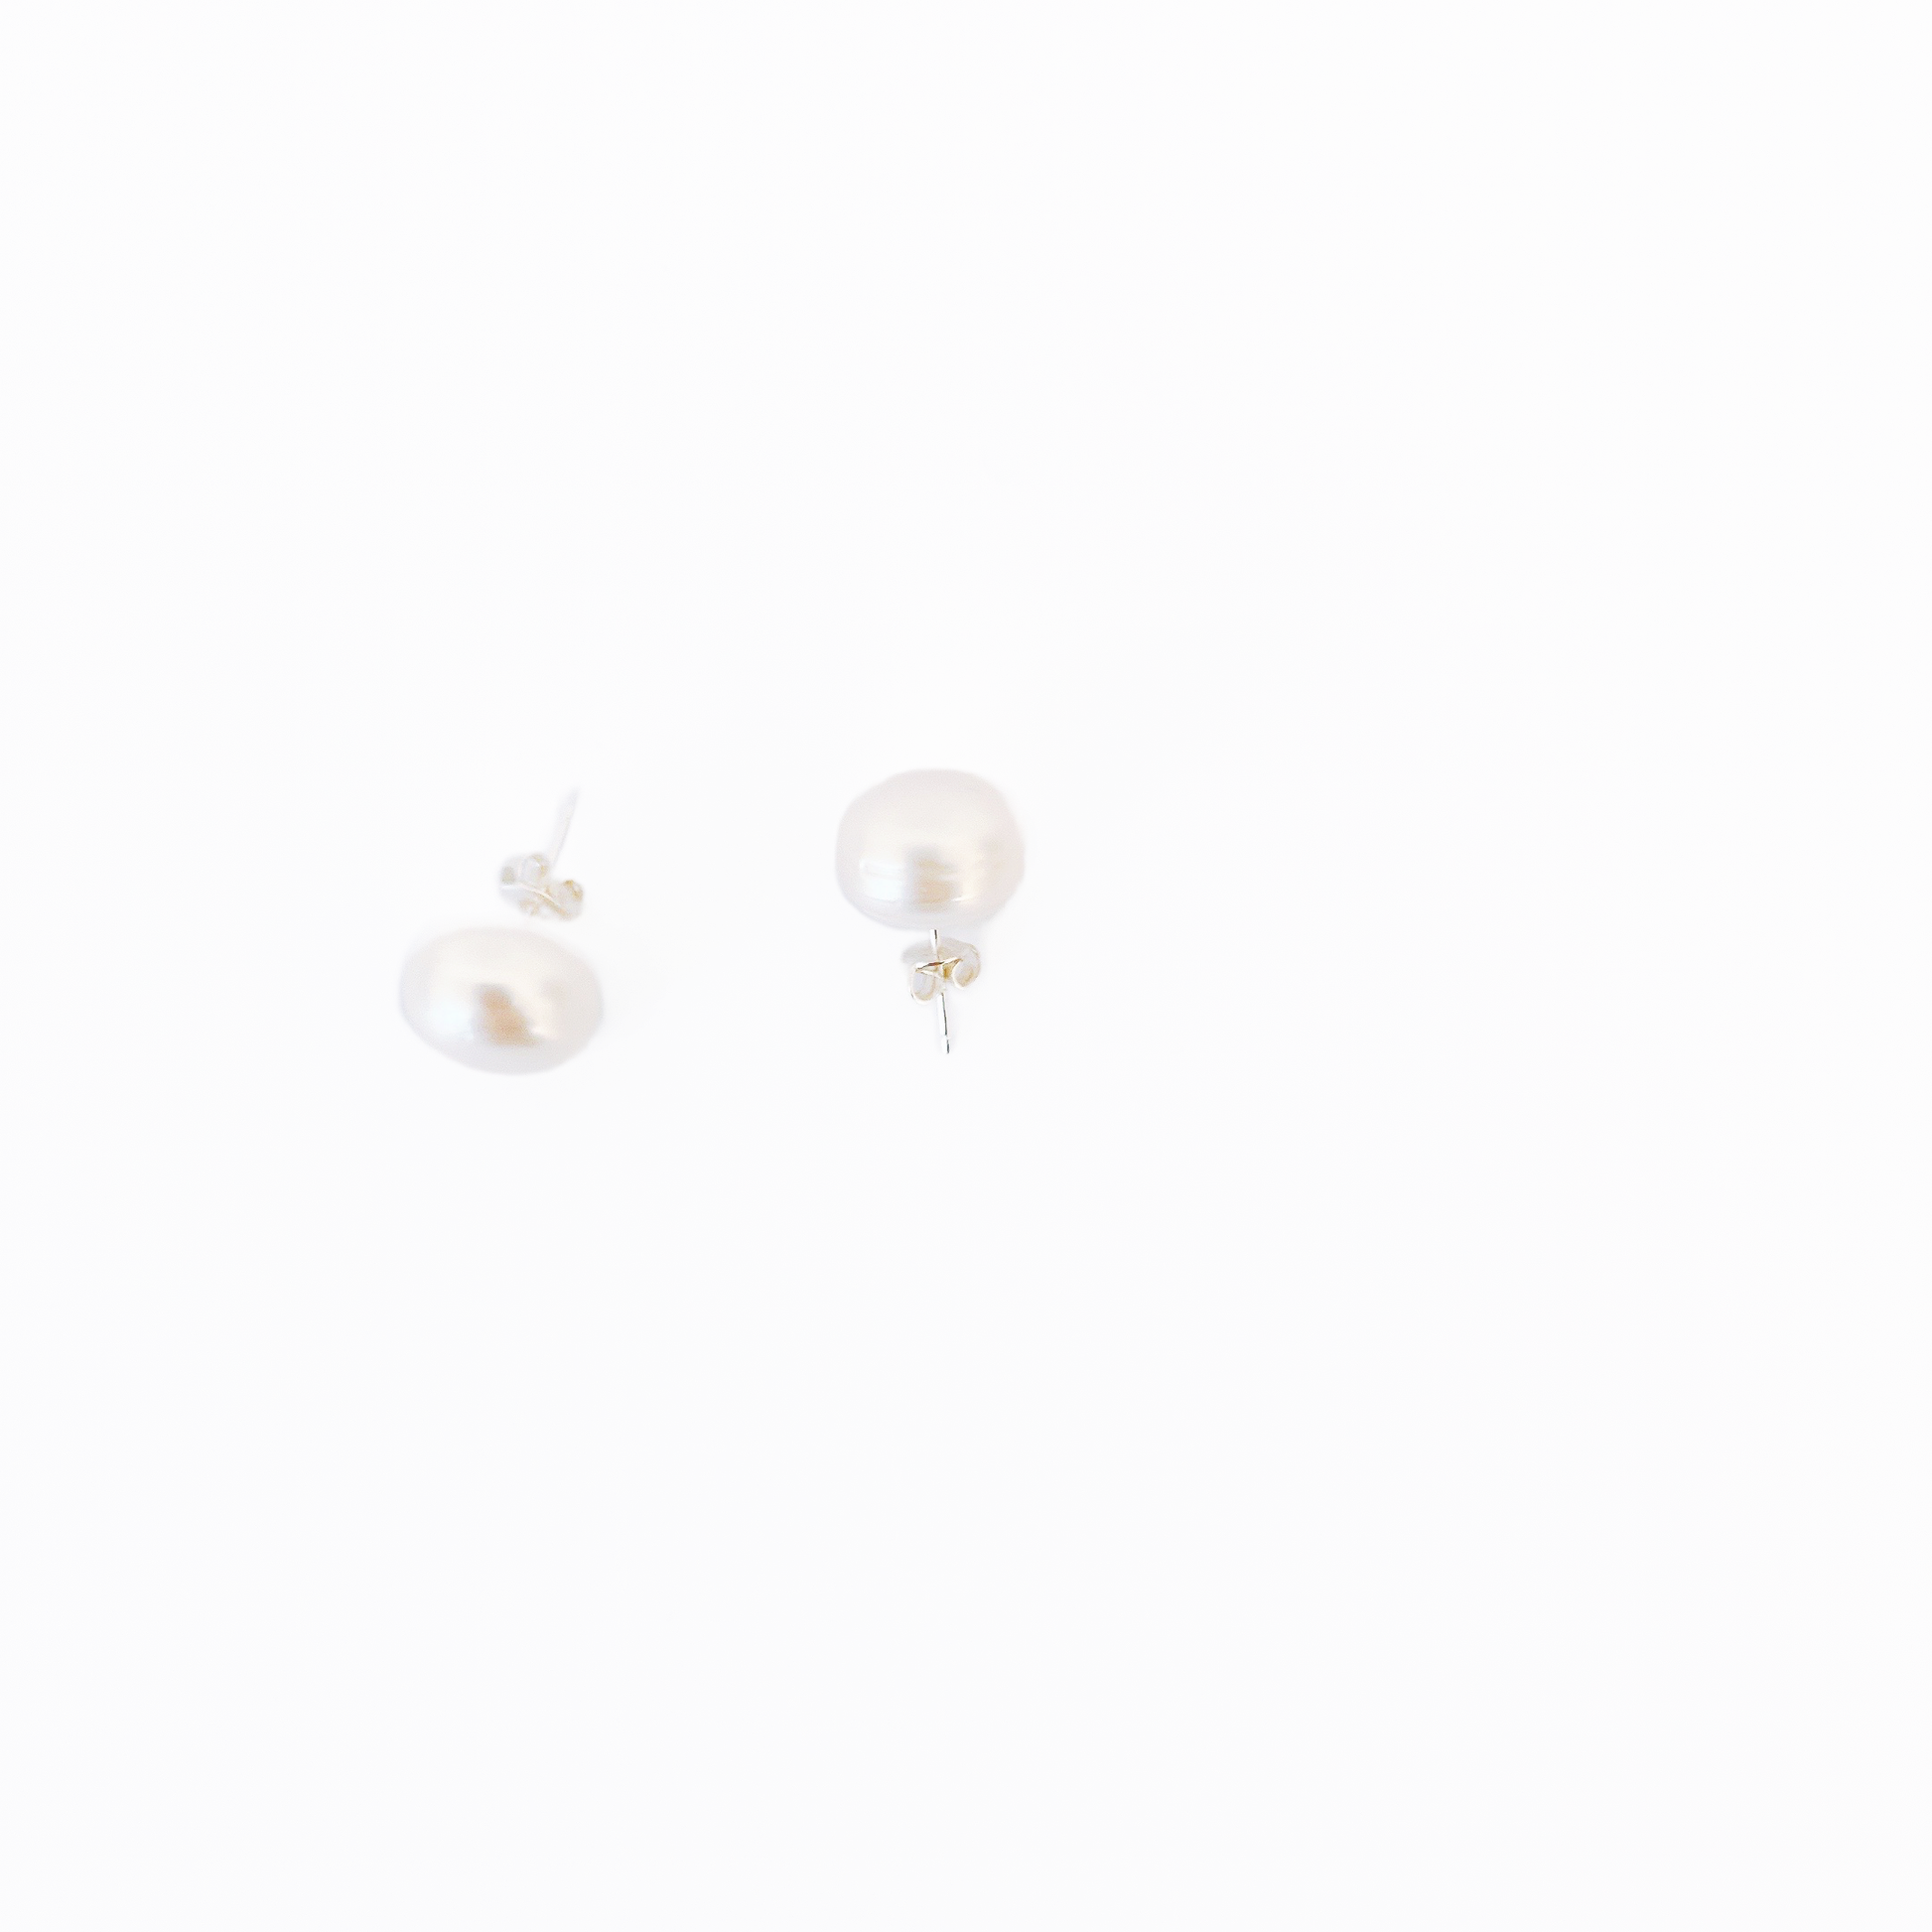 Simple pearl stud white, silver925 or 14k gold filled by Hikaru Pearl